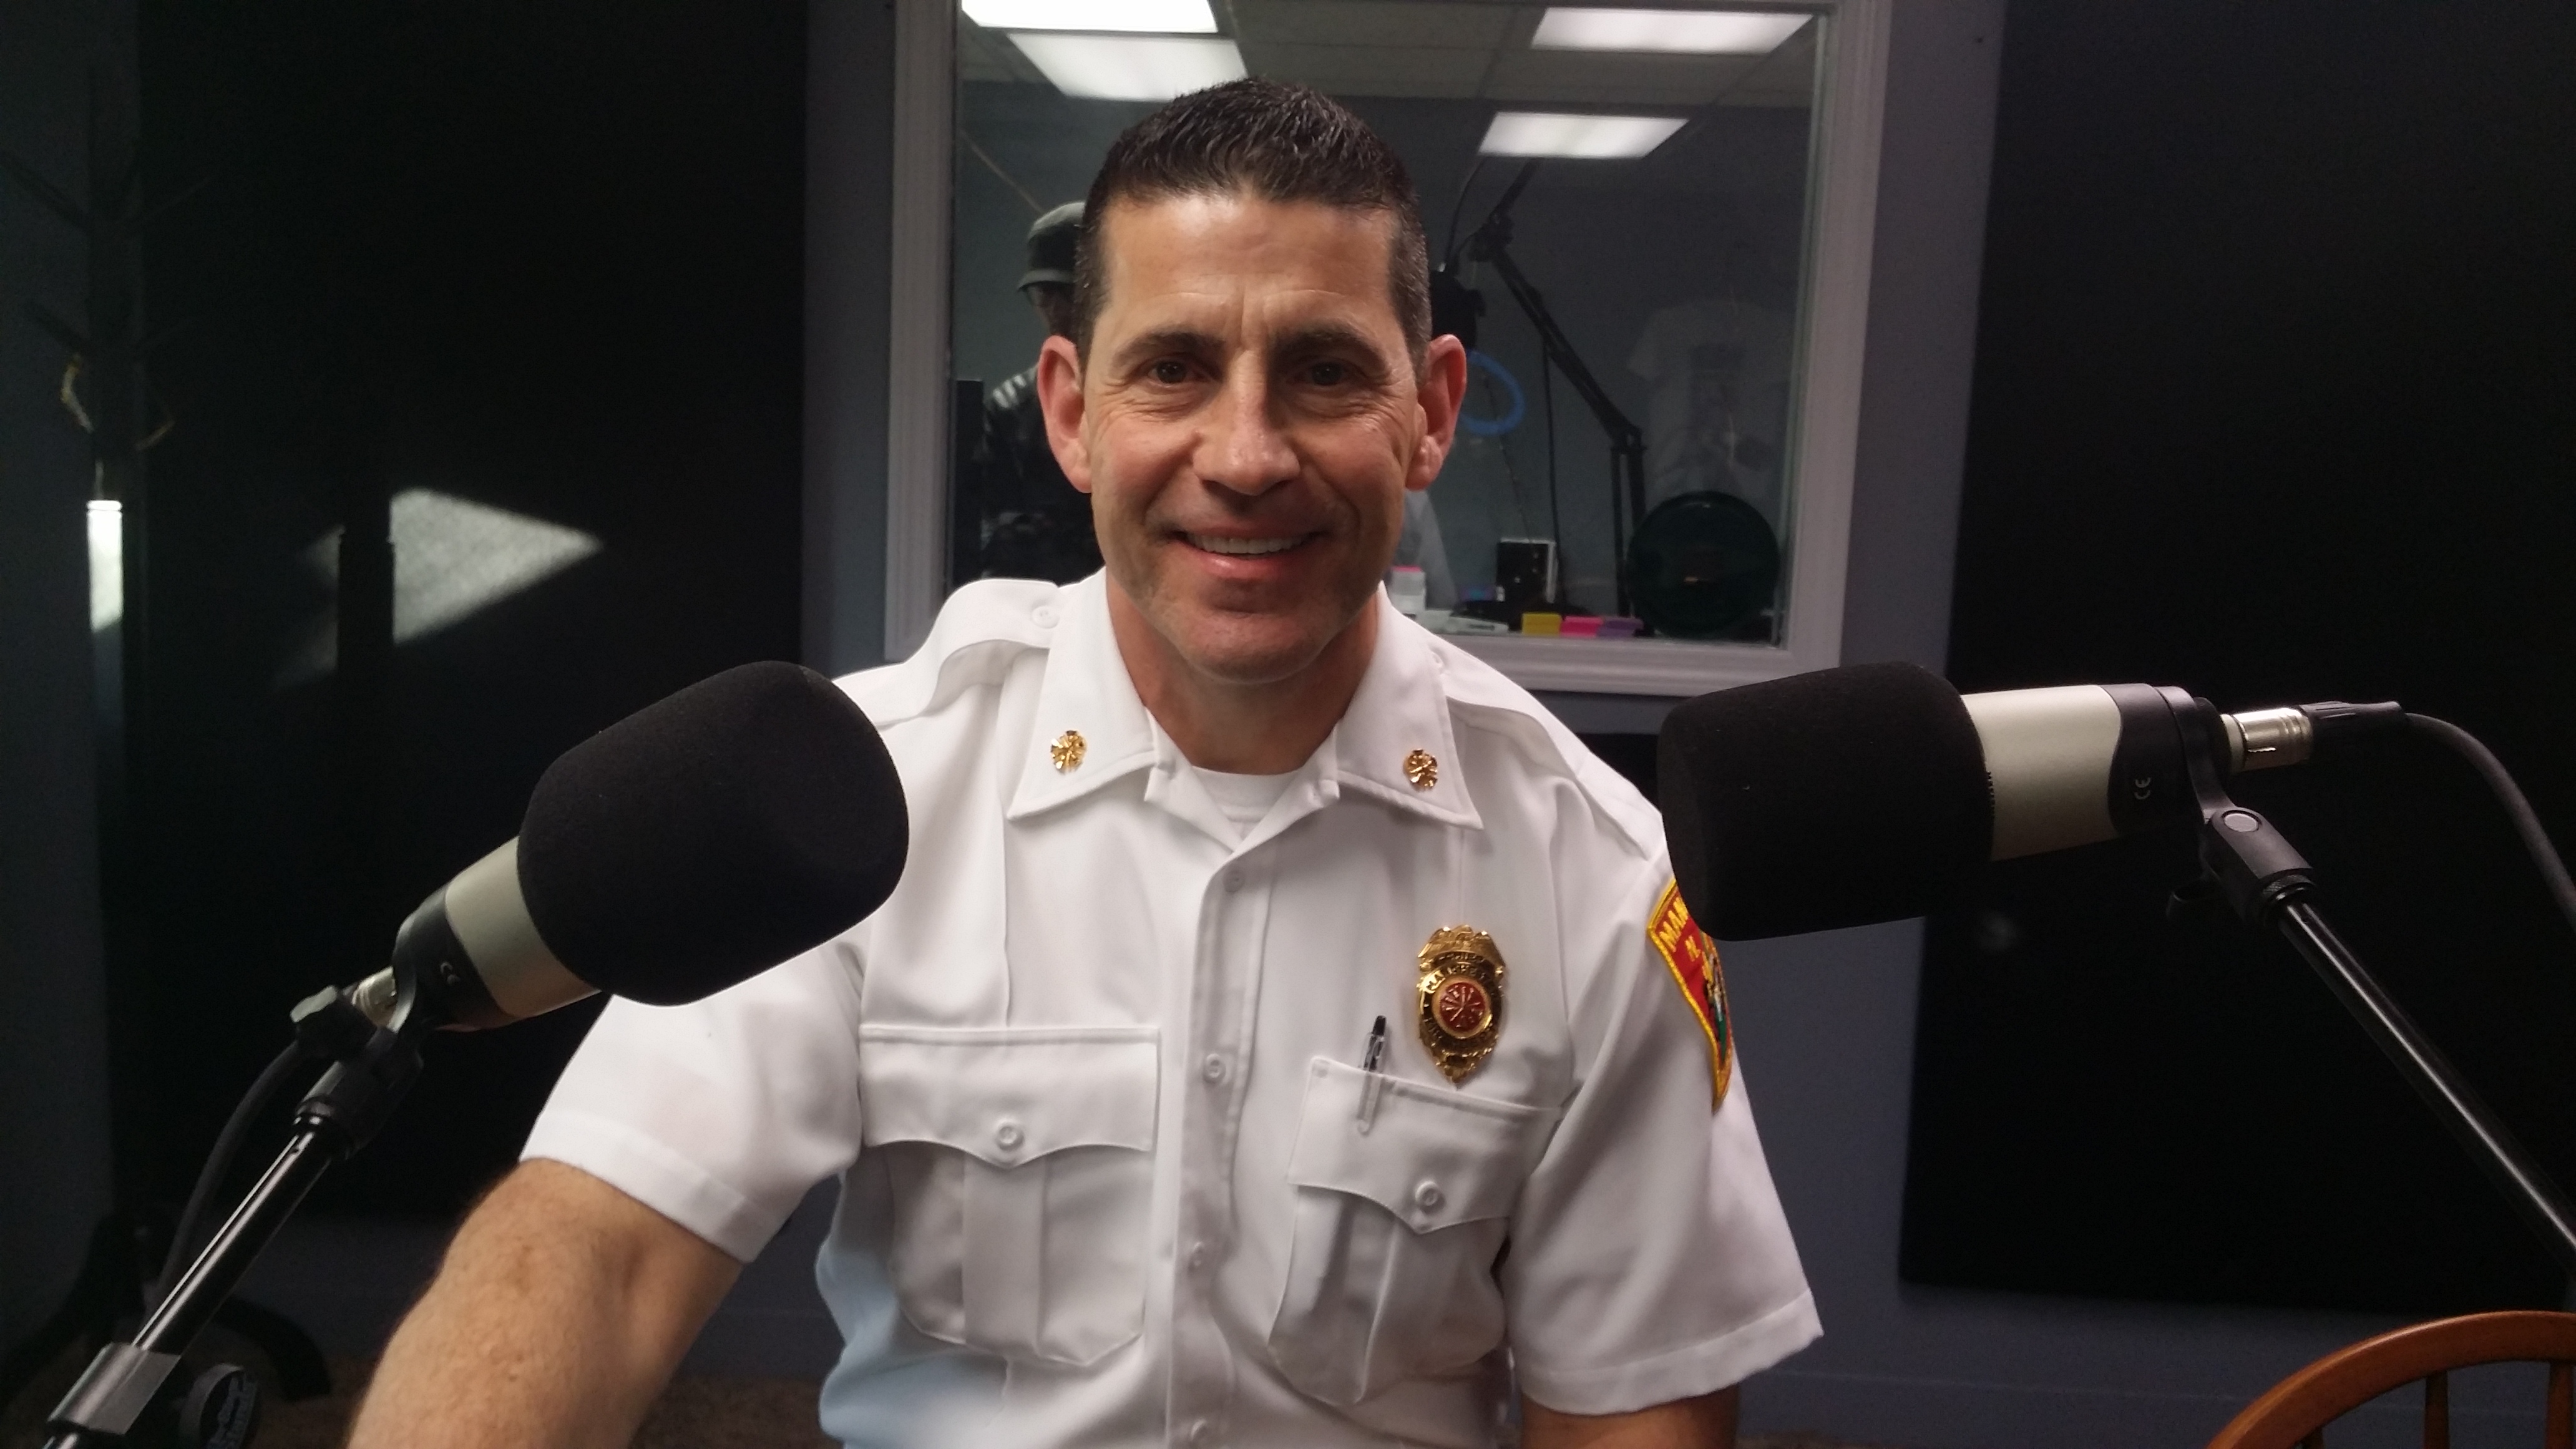 Humble Host Calls for Restructuring of Manchester Fire Dept.